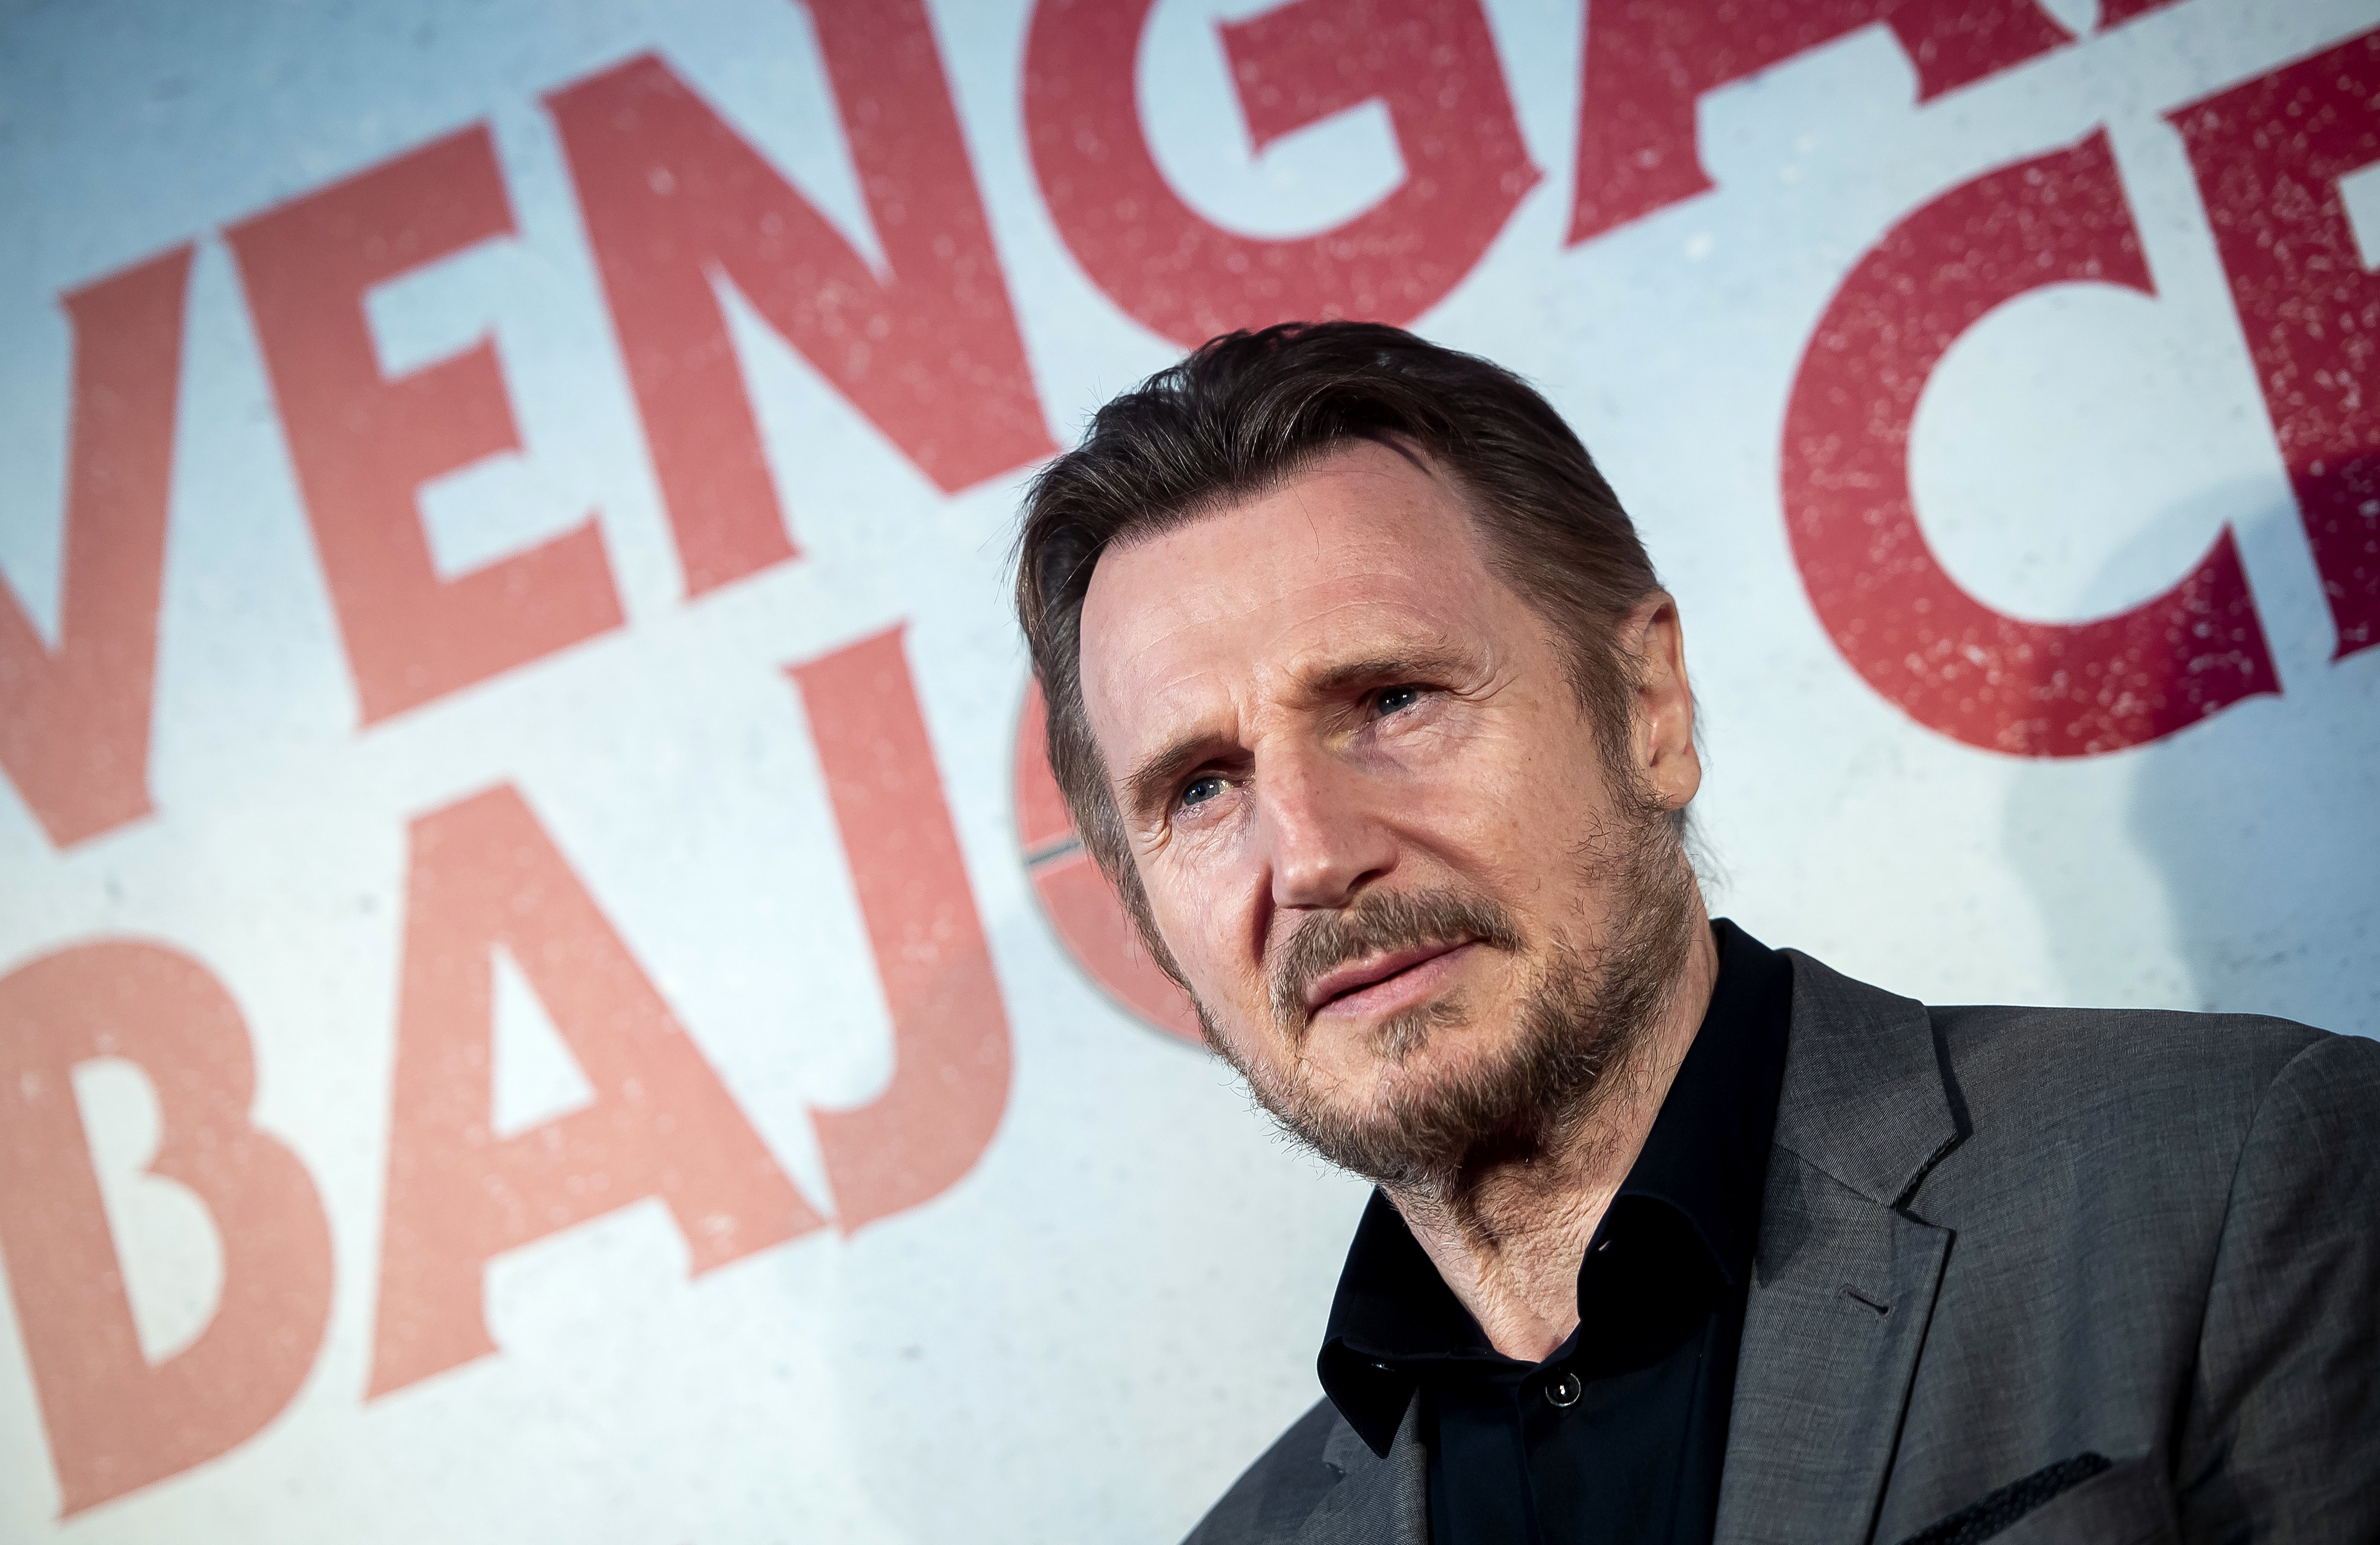 Liam Neeson during the "Venganza Bajo Cero" Madrid premiere on July 15, 2019 in Madrid, Spain. / Source: Getty Images